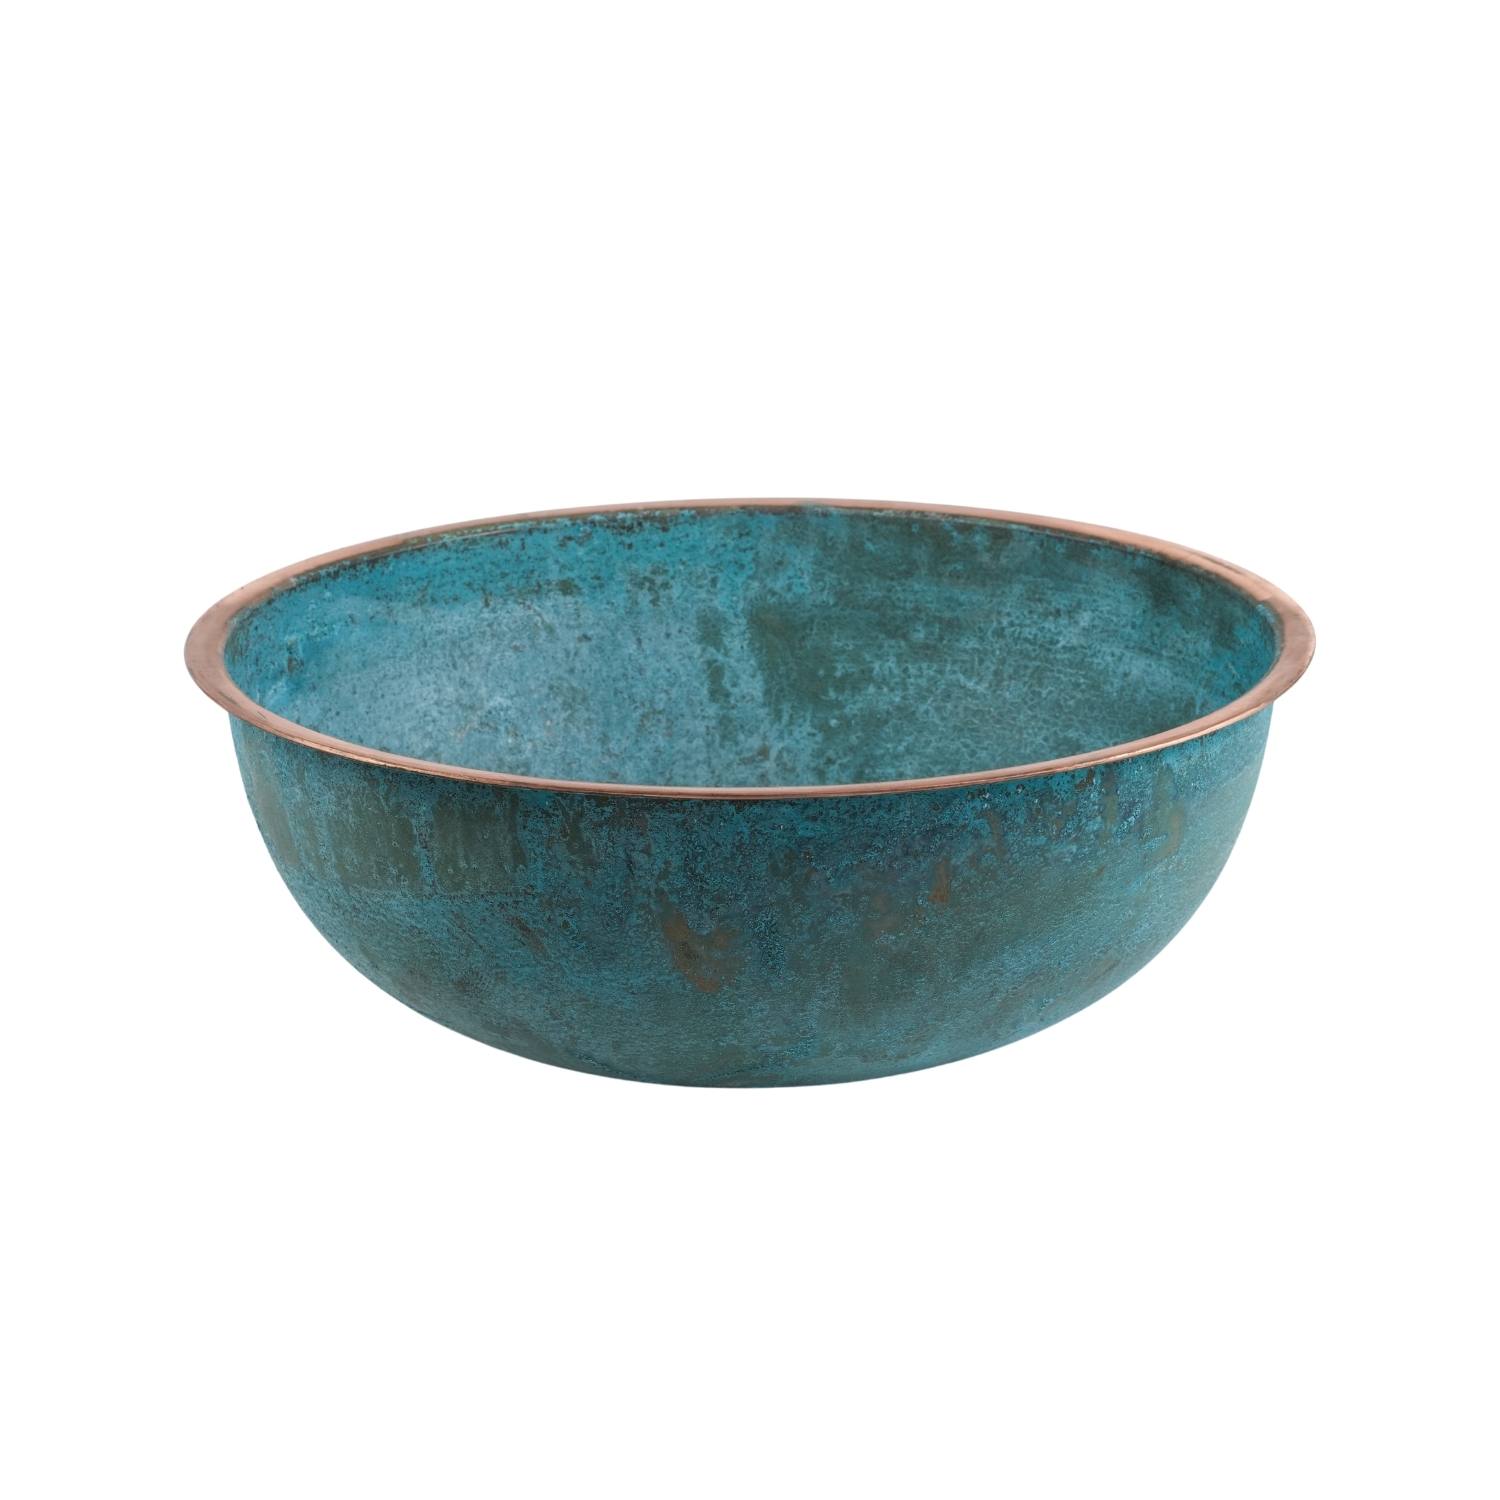 Modeditions Neutrals / Green Luxurious Green Patina Copper Bowl For Detox Manicure & Foot Spa In White